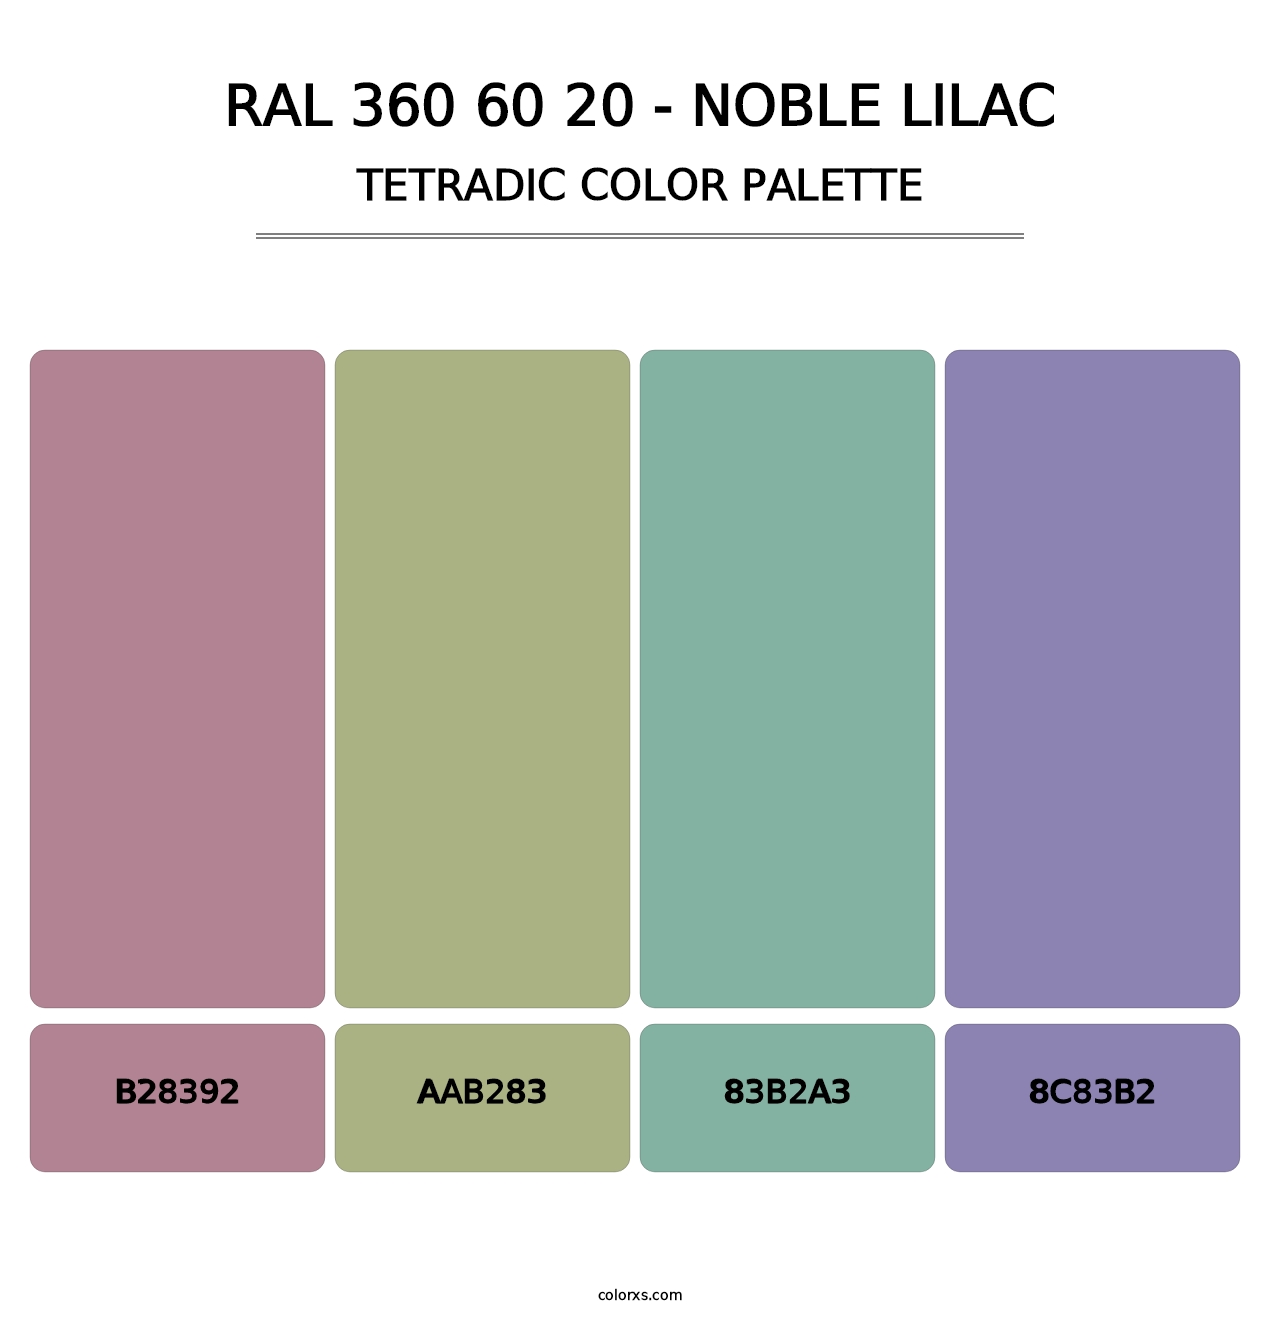 RAL 360 60 20 - Noble Lilac - Tetradic Color Palette